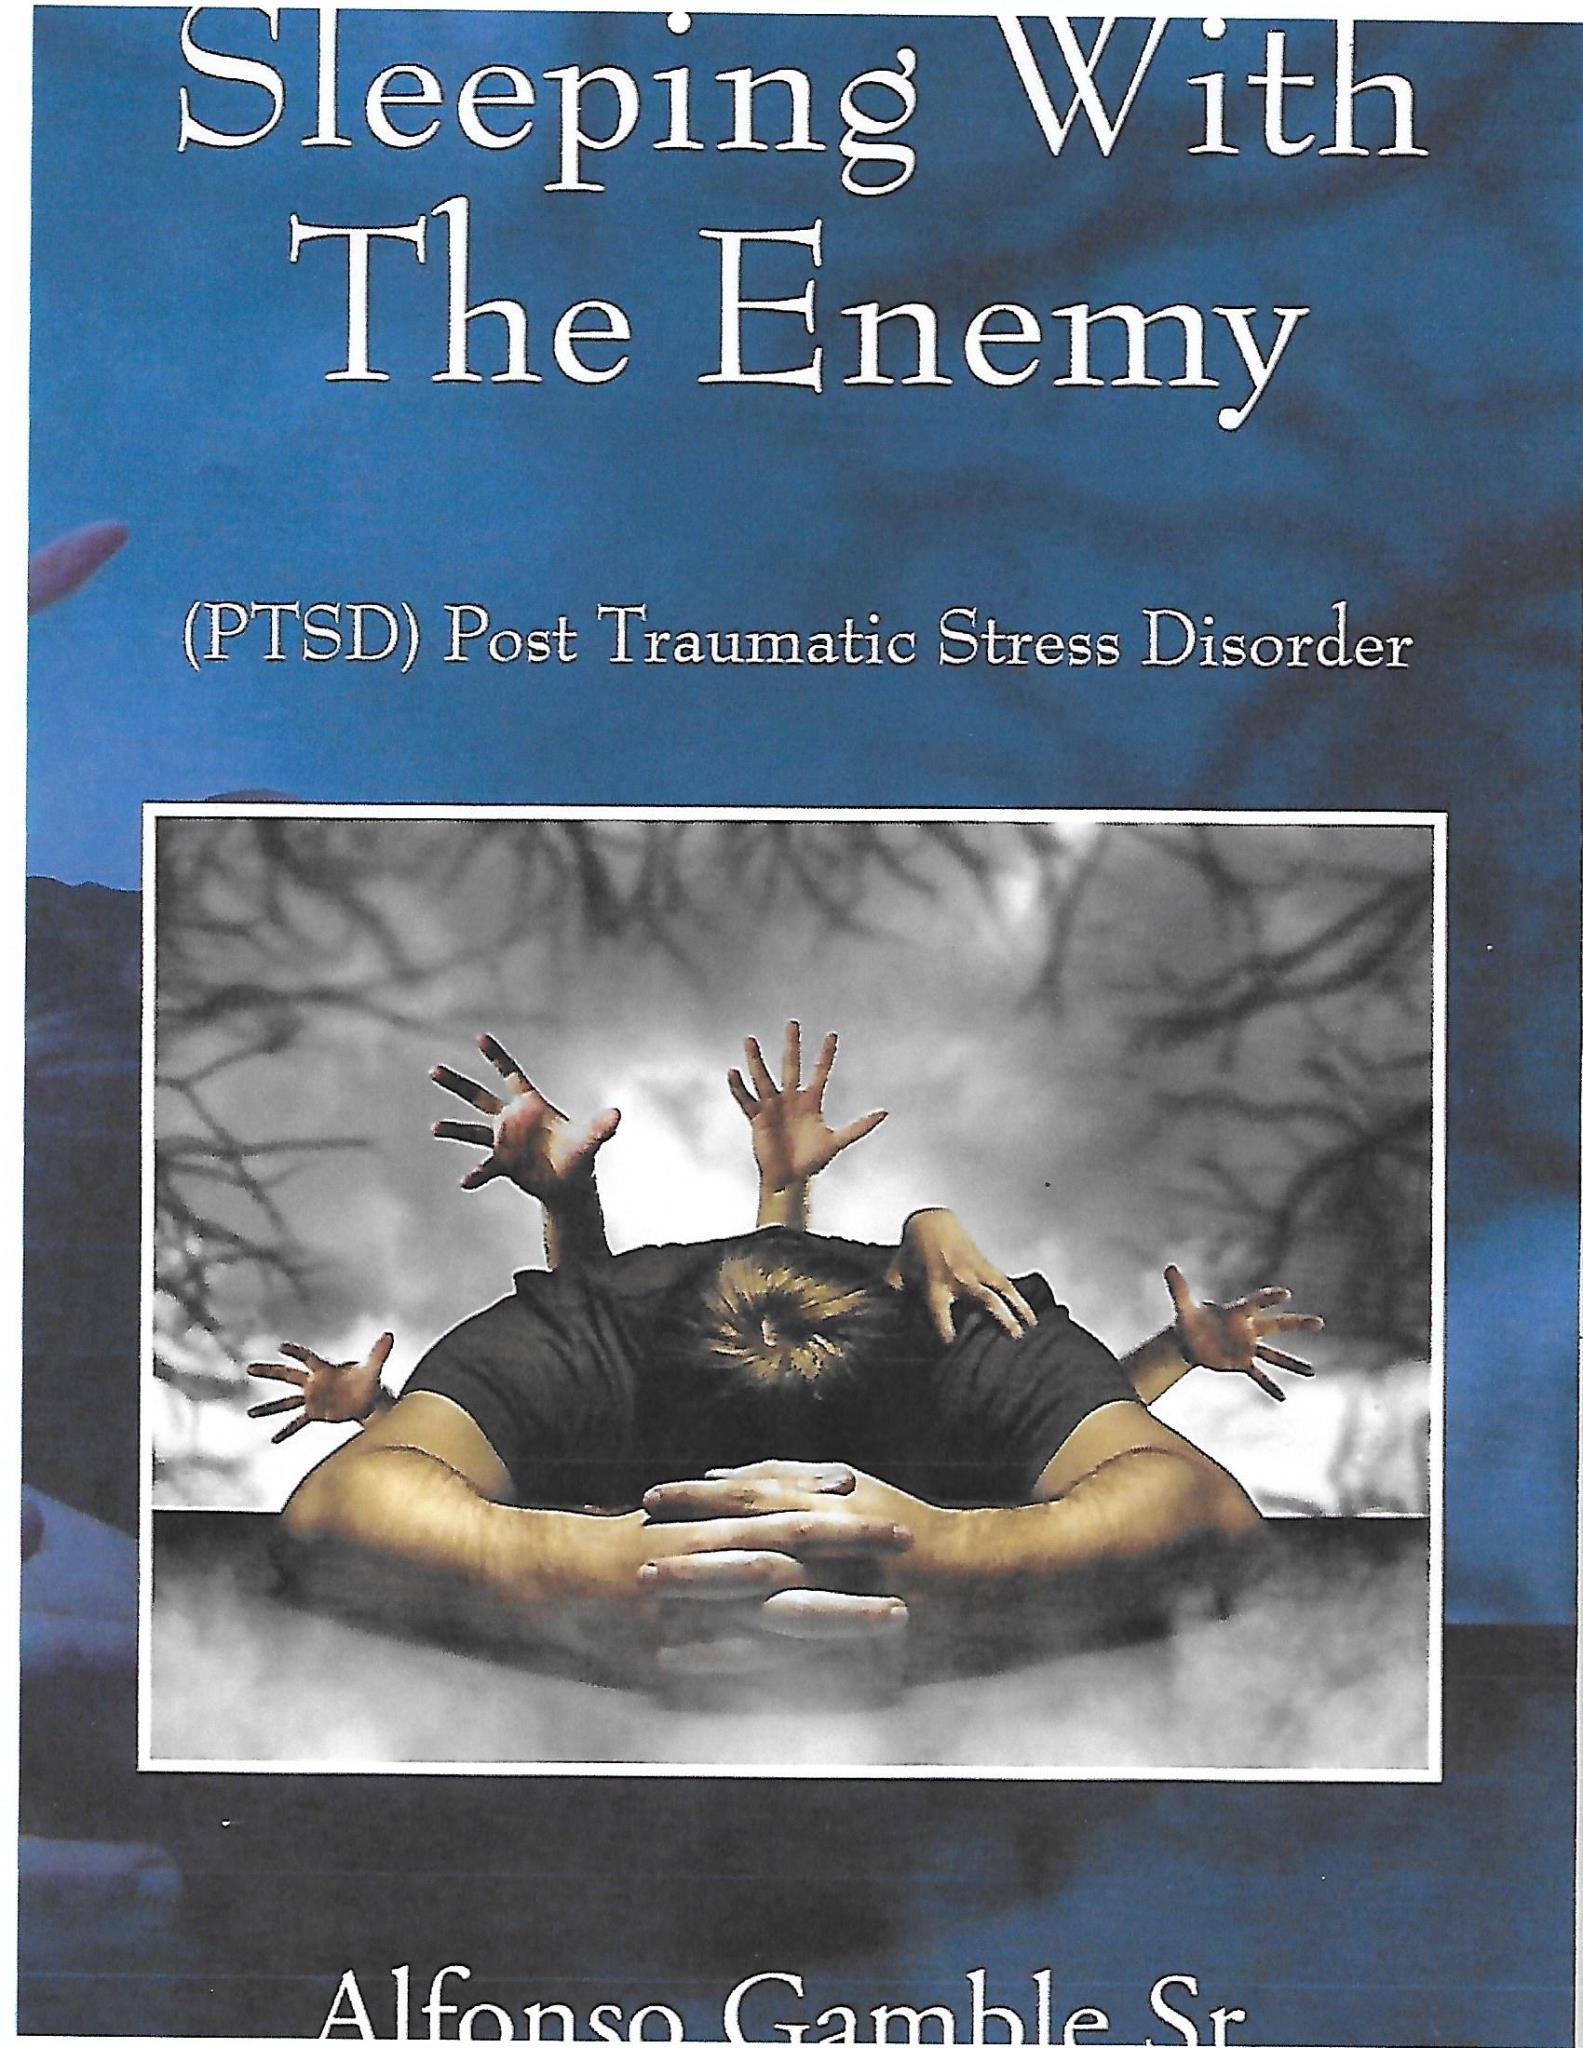 Sleeping With The Enemy (PTSD) in Augusta, GA